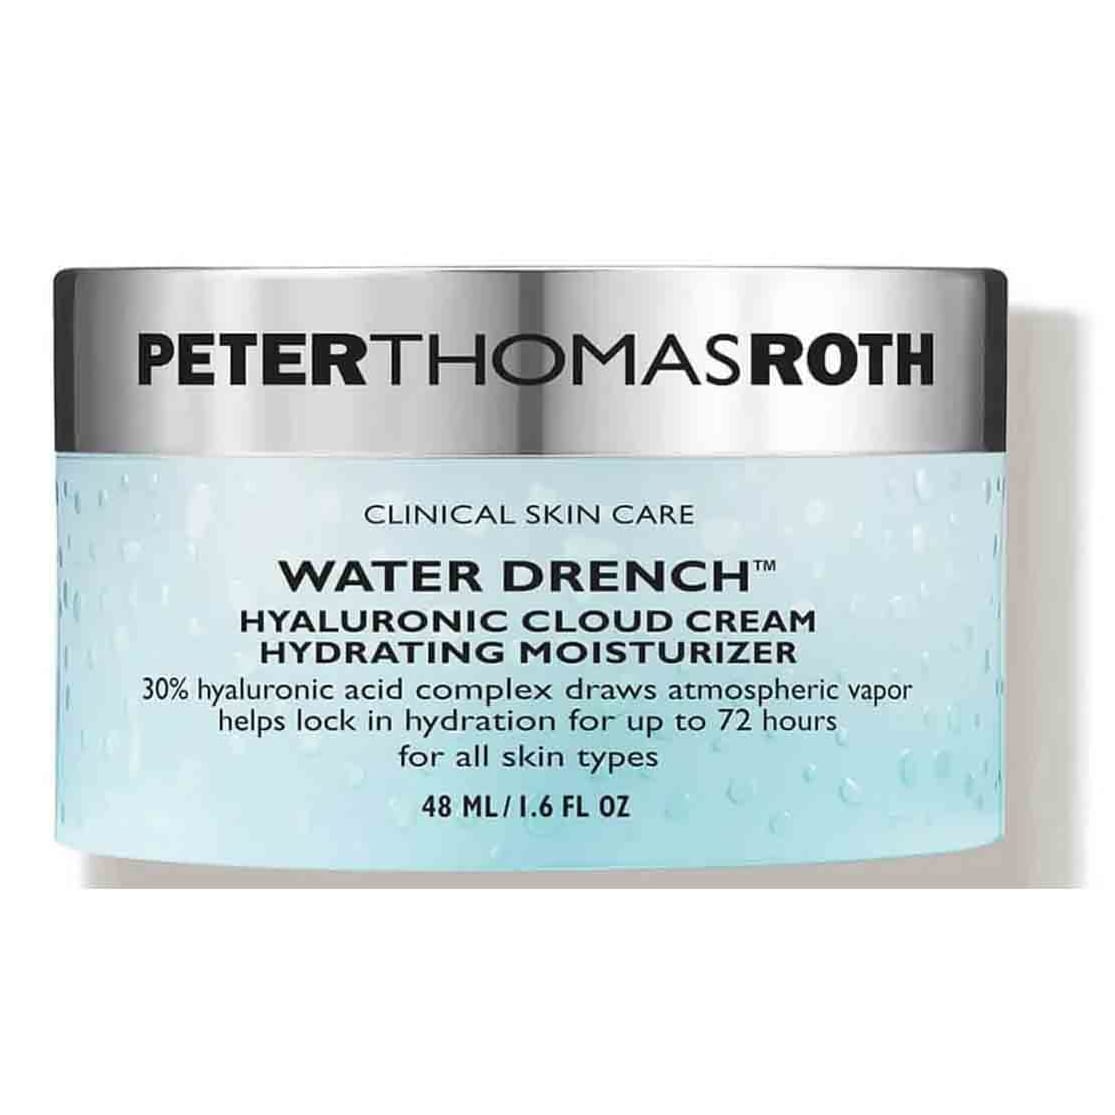 Water Drench Hyaluronic Cloud Cream Hydrating Moisturizer (1.6 oz.)